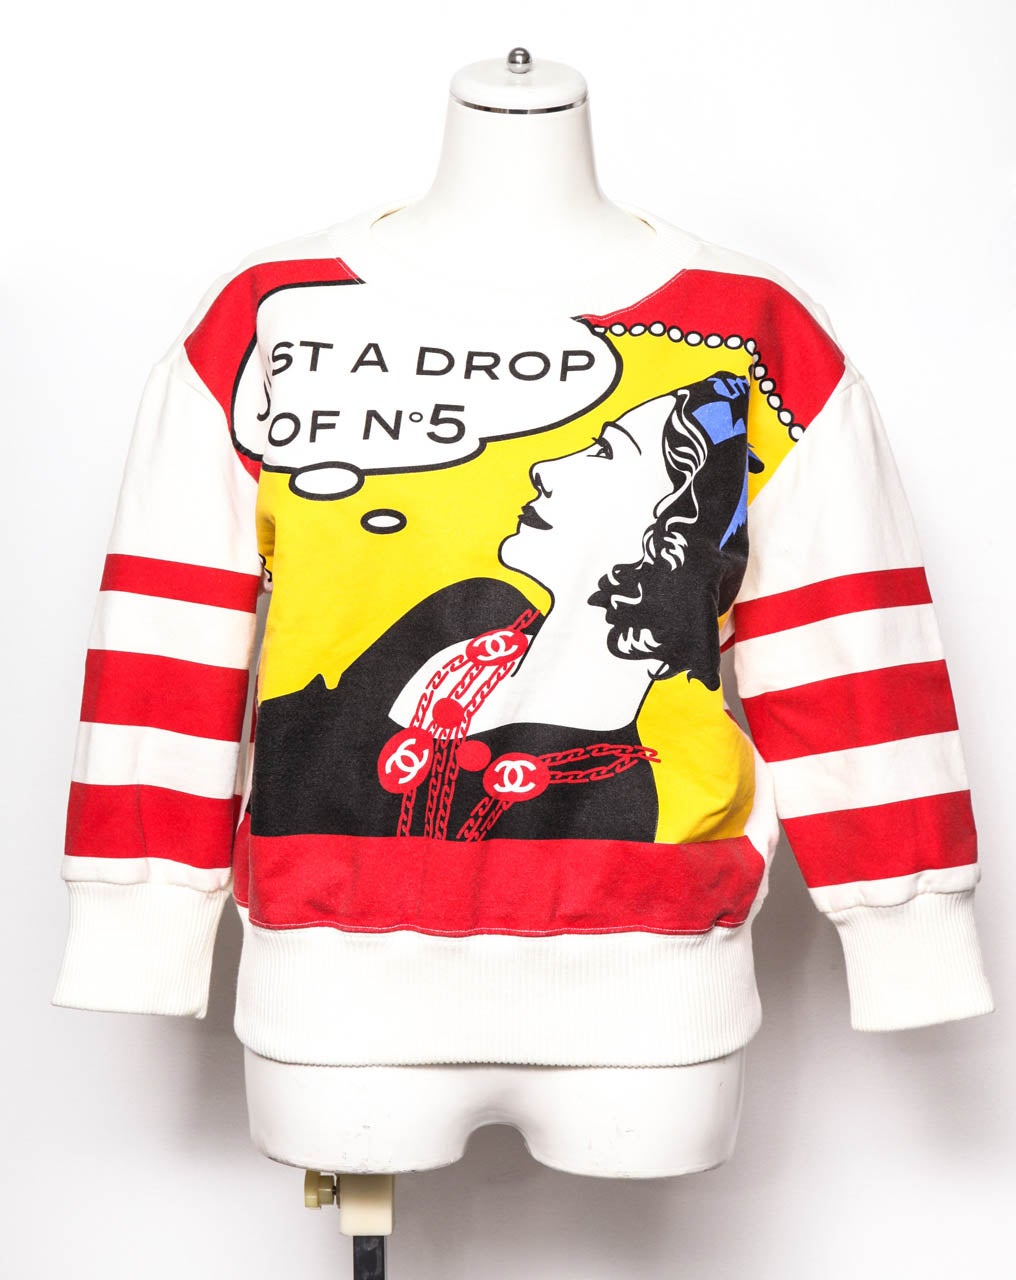 Chanel pop art print sweater features Coco Chanel.